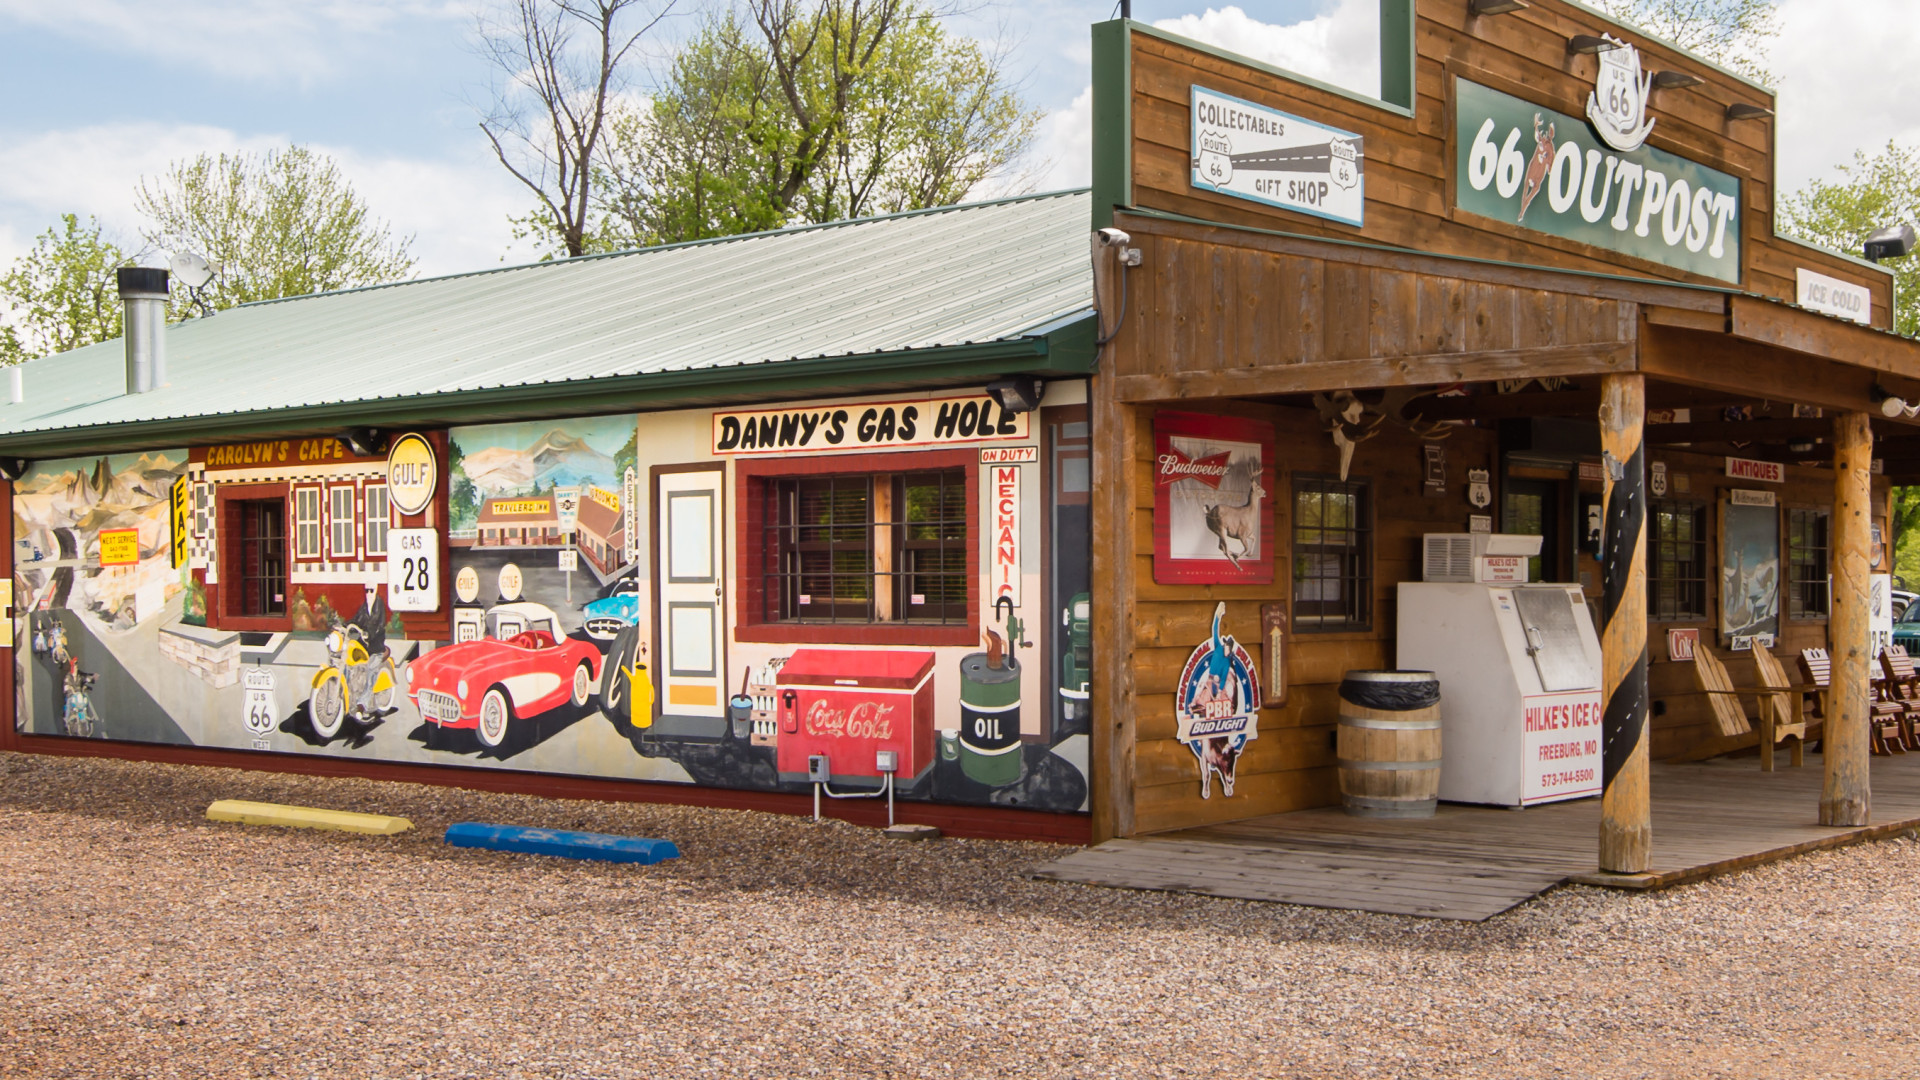 The iconic mural illustrating the facade of the Route 66 Outpost General Store, near Fanning.